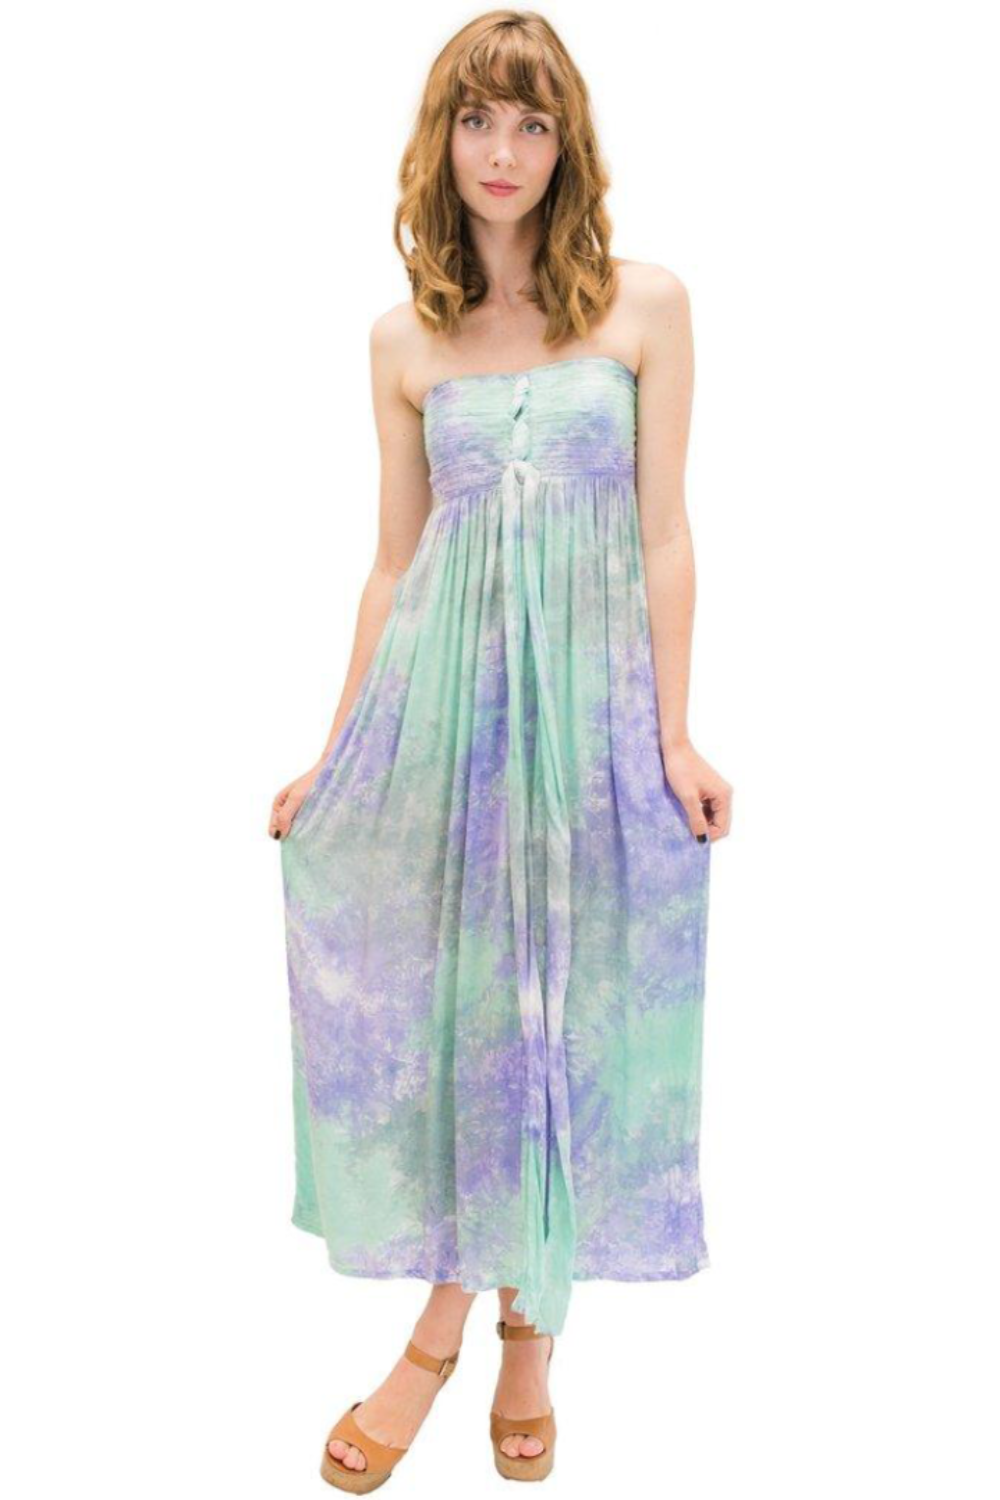 This Lani Long Hawaiian Tye Dye Dress in Smoke has a wonderful design that is all hand-dyed.  the Lani Long Hawaiian Tye Dye Dress in Smoke features adjustable spaghetti straps that could be tucked in to make it strapless.  For added support, this Lani Long Hawaiian Tye Dye Dress in Smoke features a lace back with an elastic bust.  For added comfort, this also features a partial lining